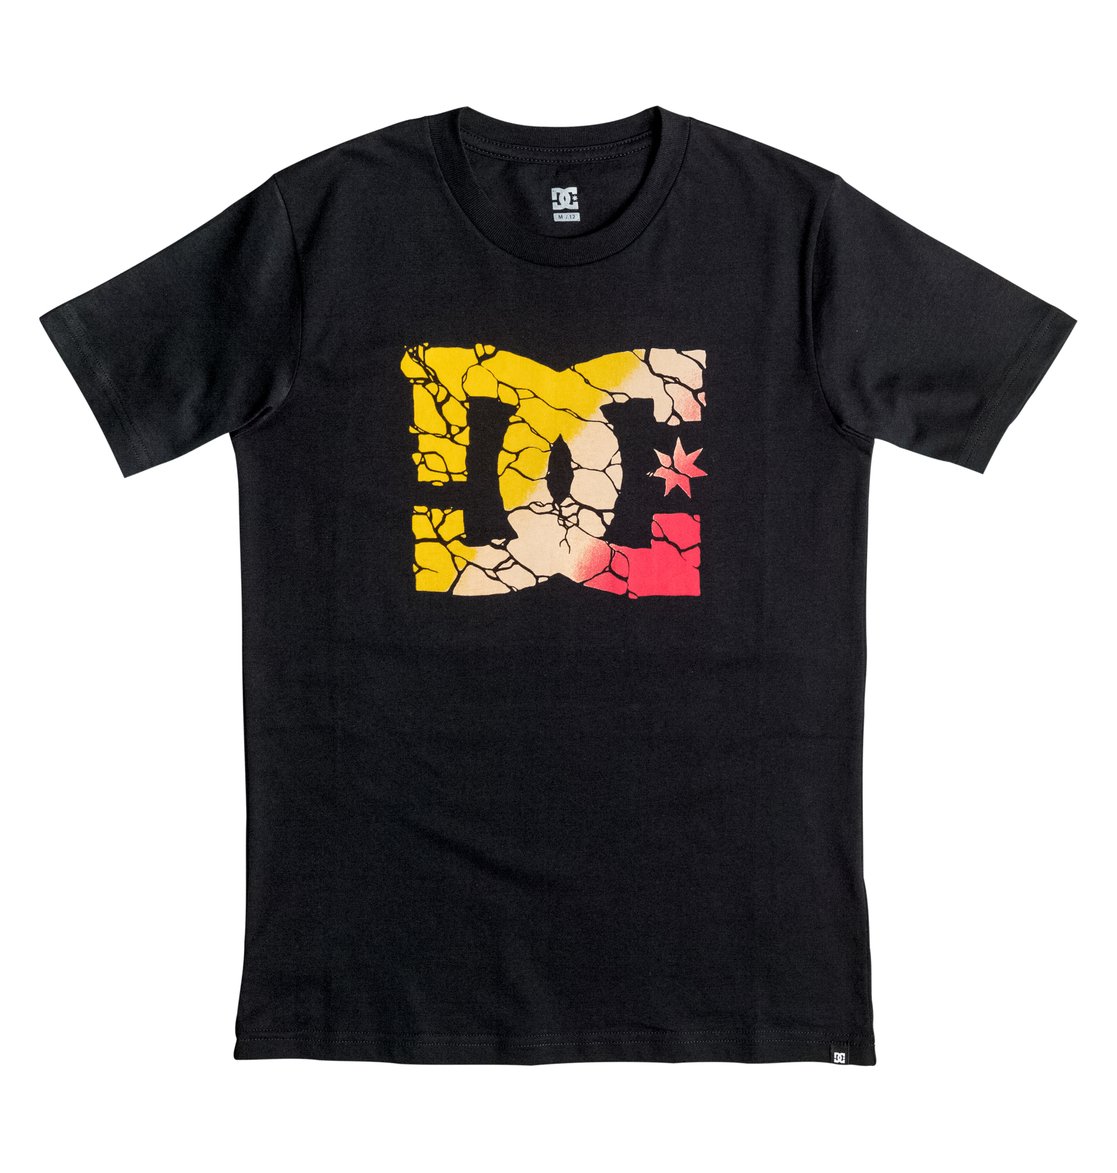 71 Limited Edition Dc shoes t shirt size chart for All Gendre